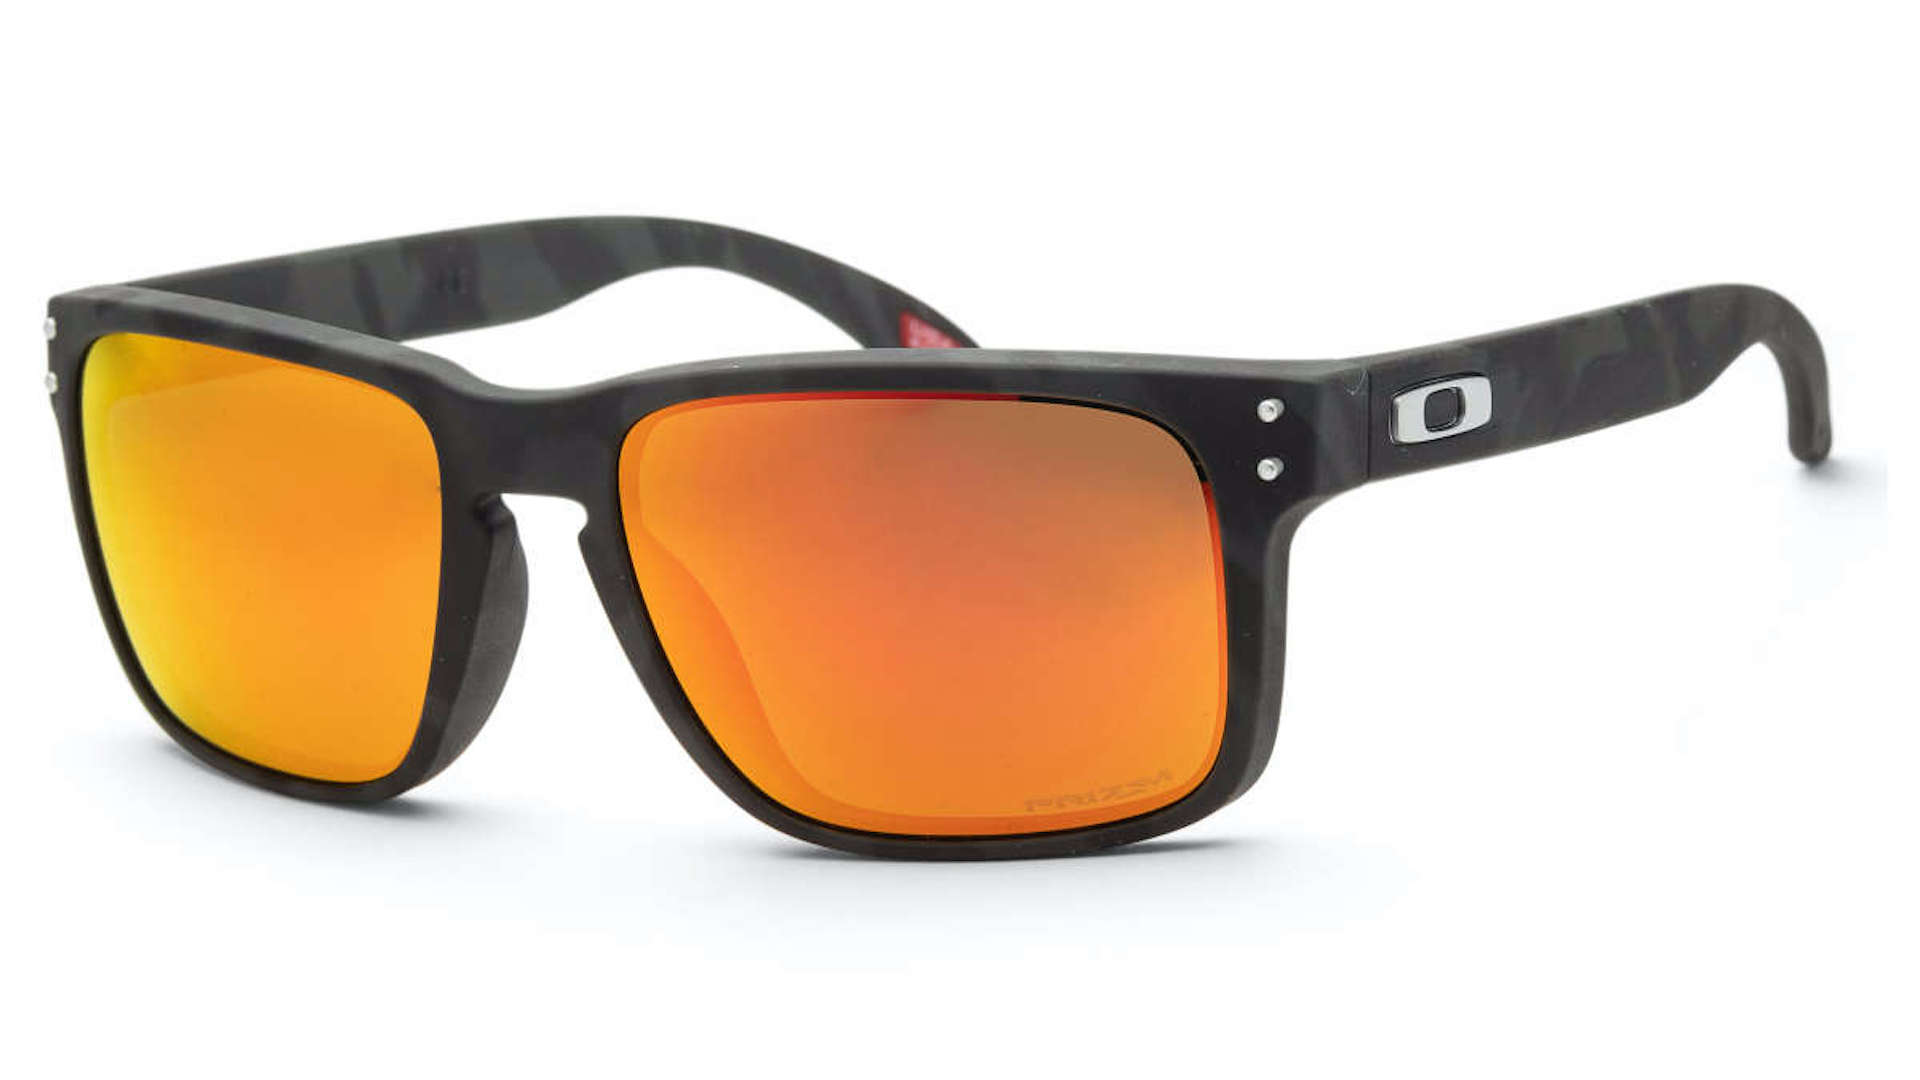 Save more than $50 on sunglasses from Oakley and Ray-Ban at Ashford